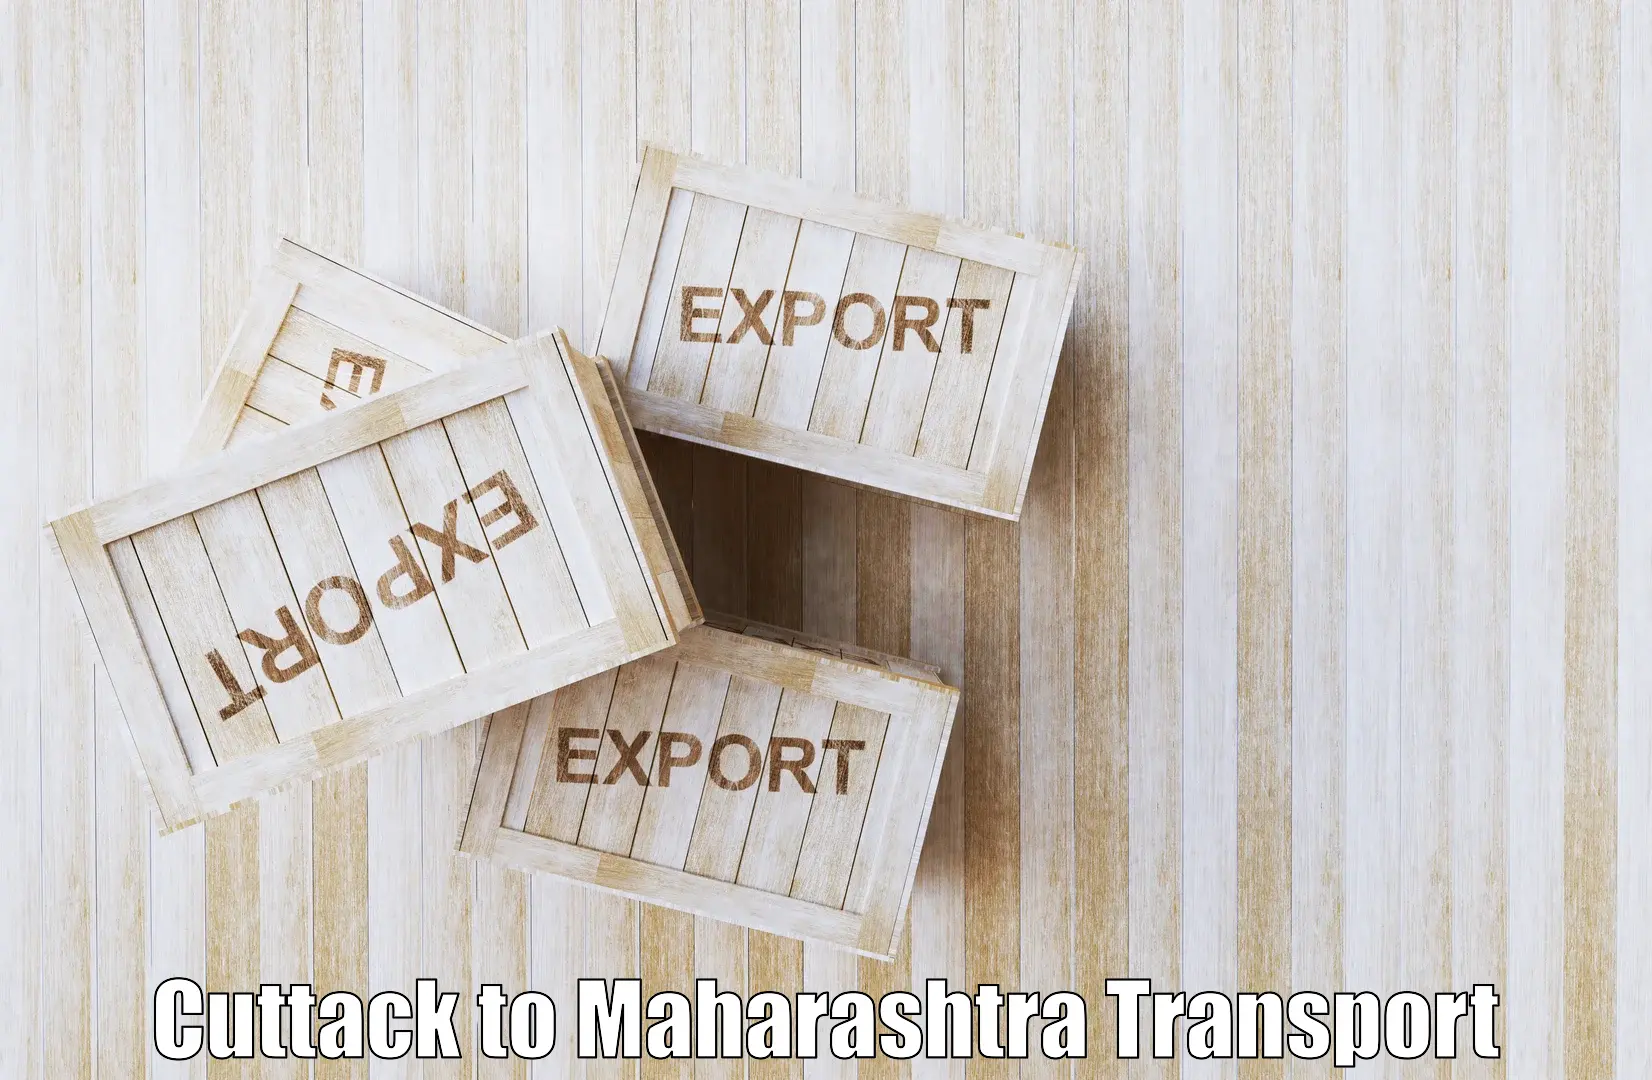 Truck transport companies in India Cuttack to Sawantwadi